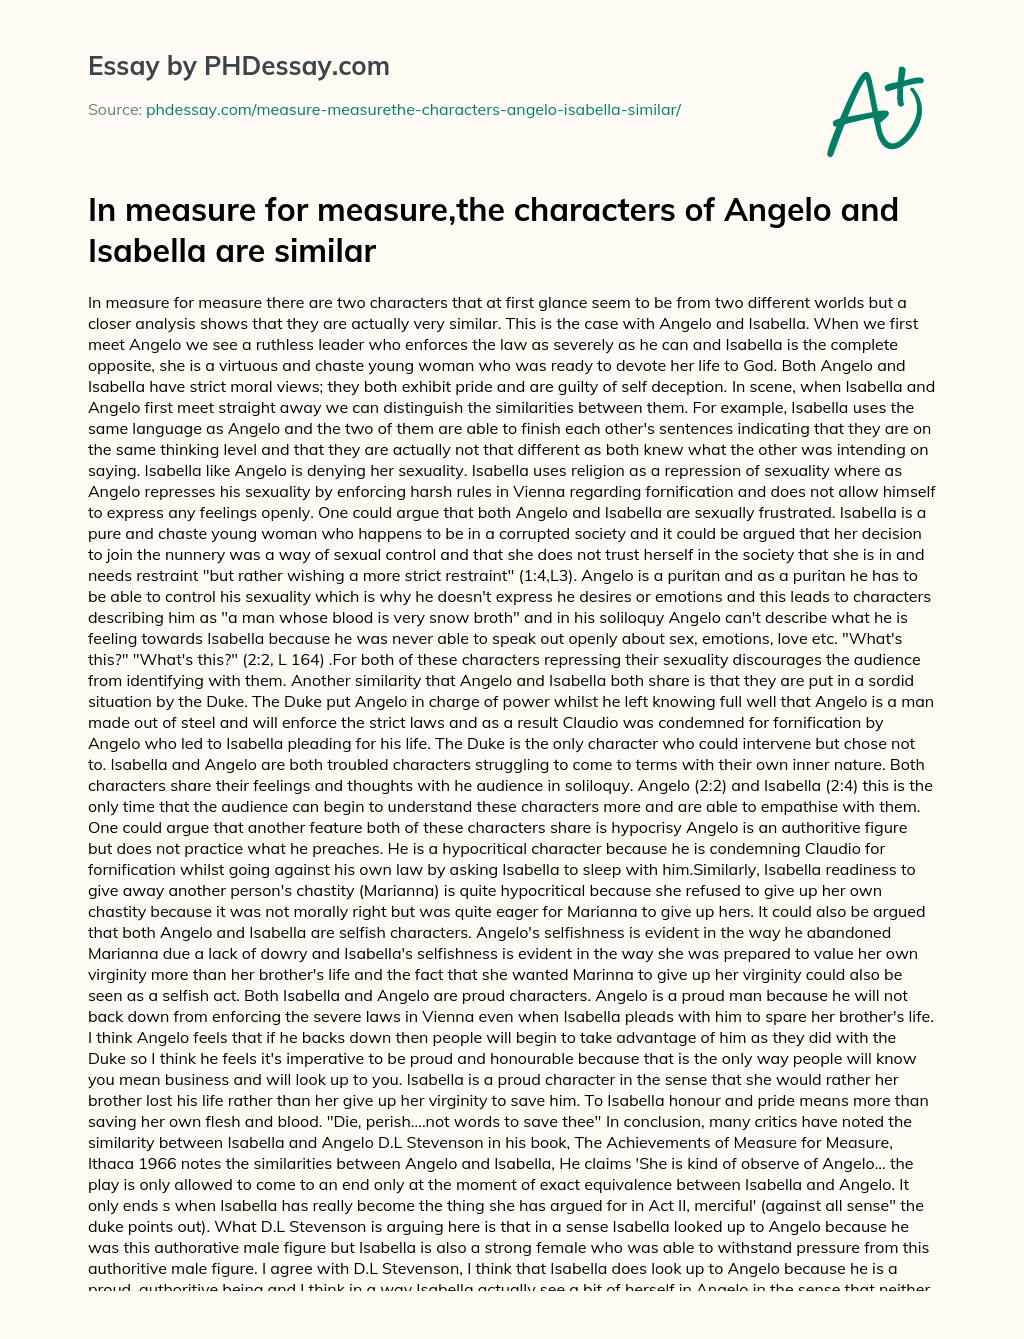 In measure for measure,the characters of Angelo and Isabella are similar essay